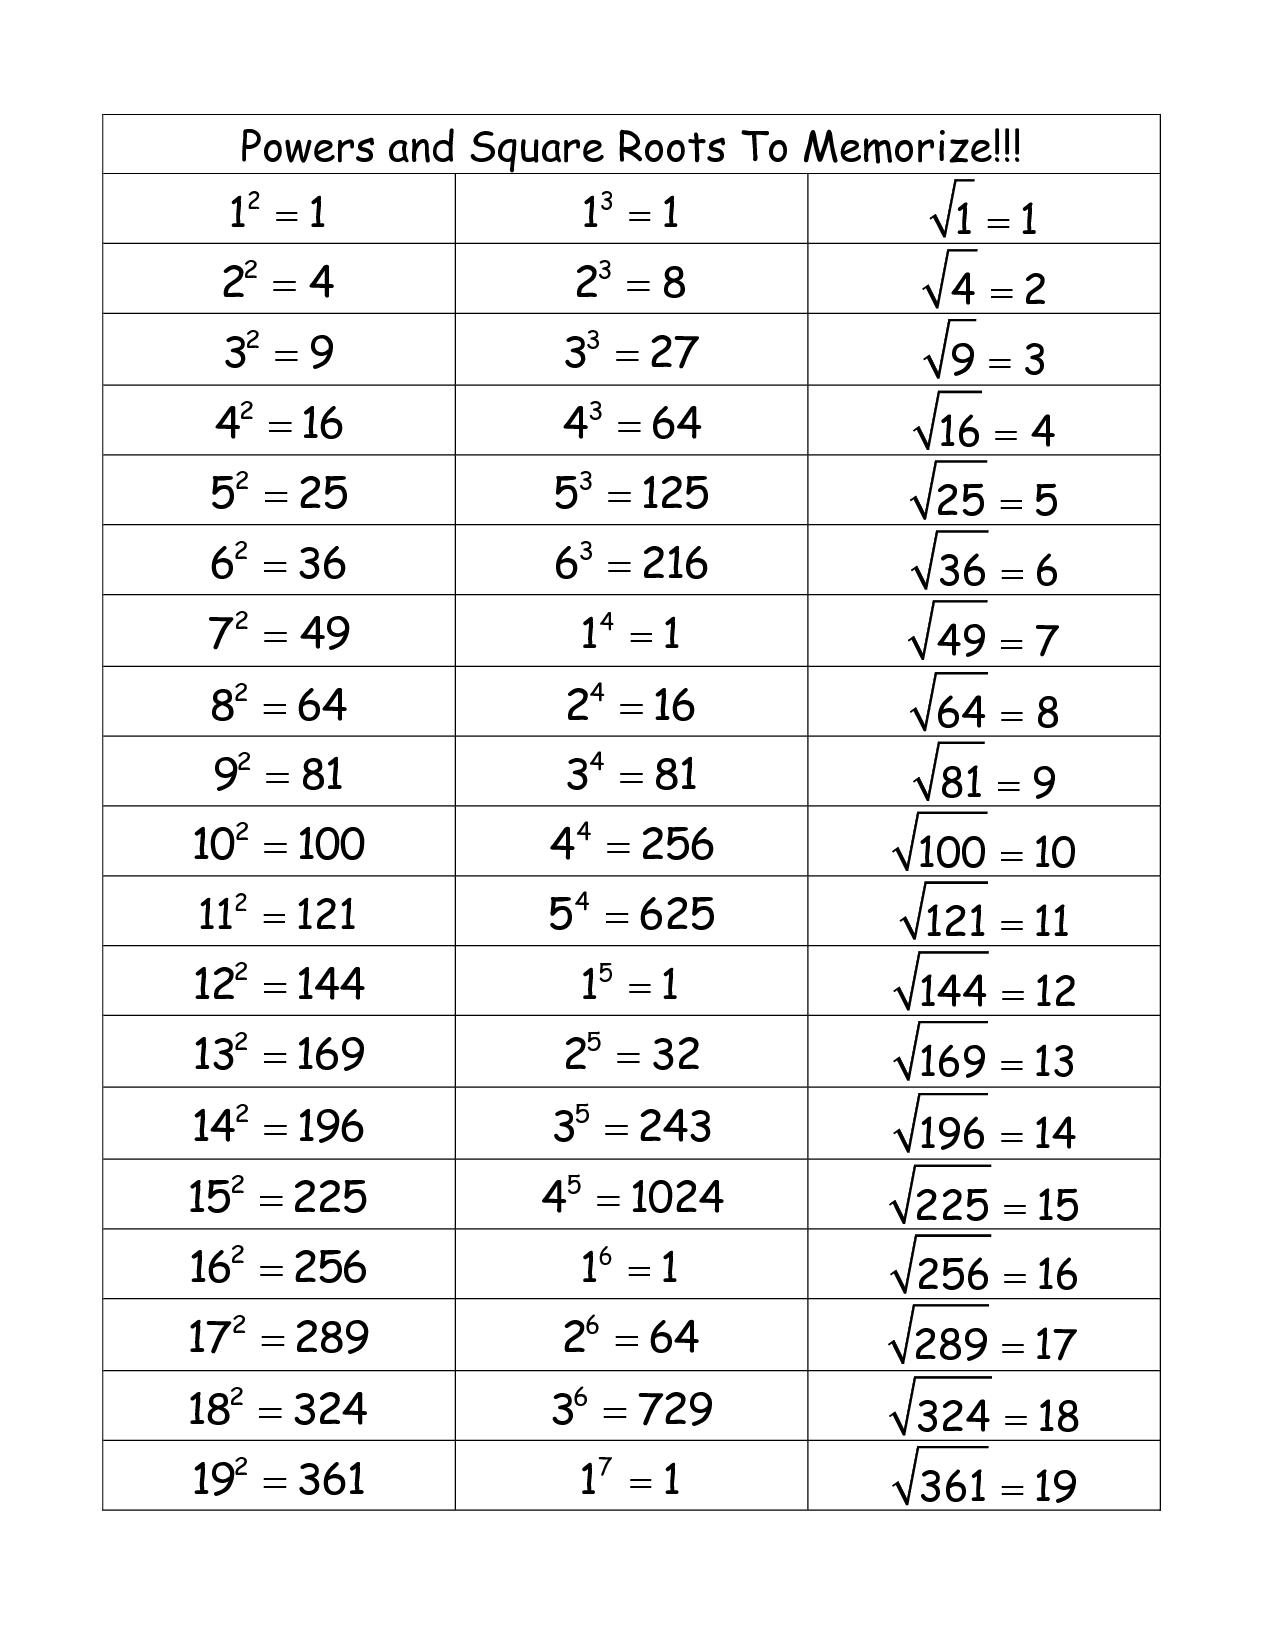 9 Best Images Of Squares And Square Roots Worksheets Perfect Square Roots List Squares And 